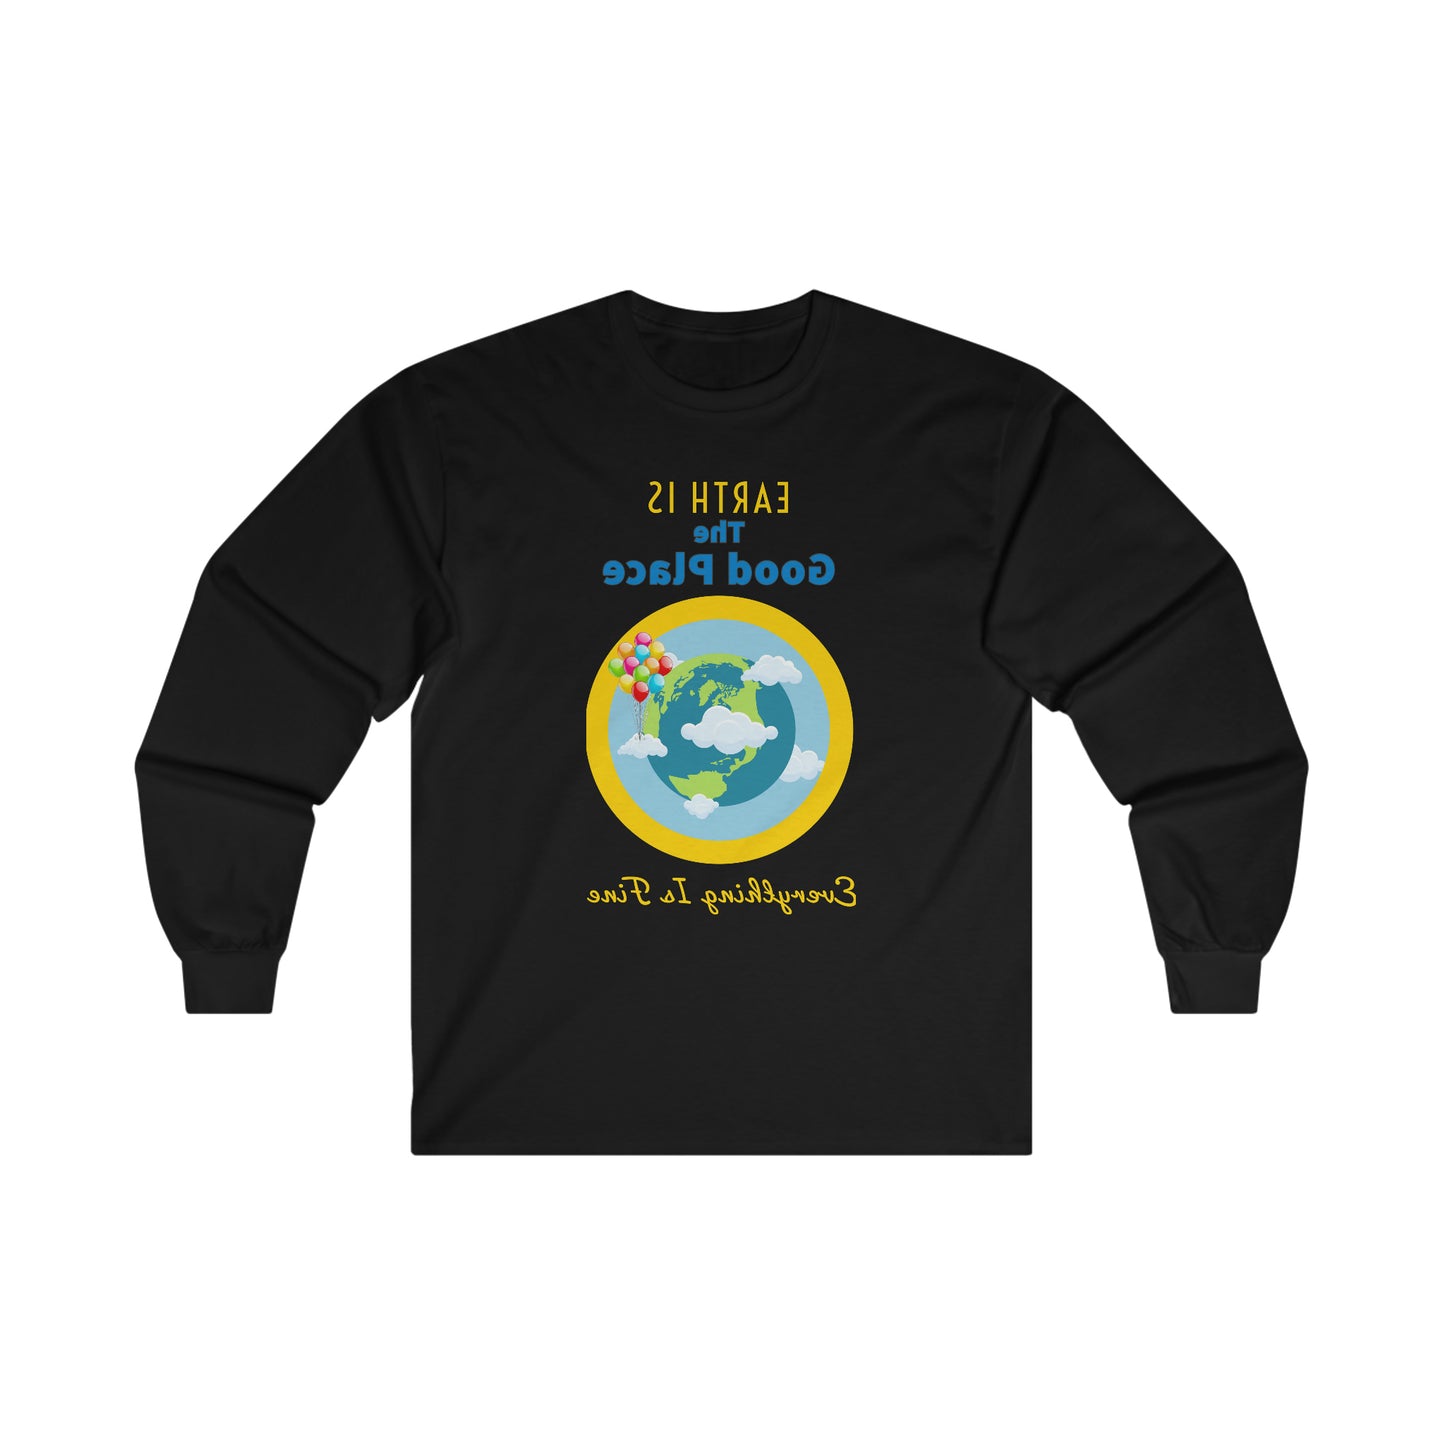 Earth is The Good Place-MIRRORVERSE - Unisex Long Sleeve Tee